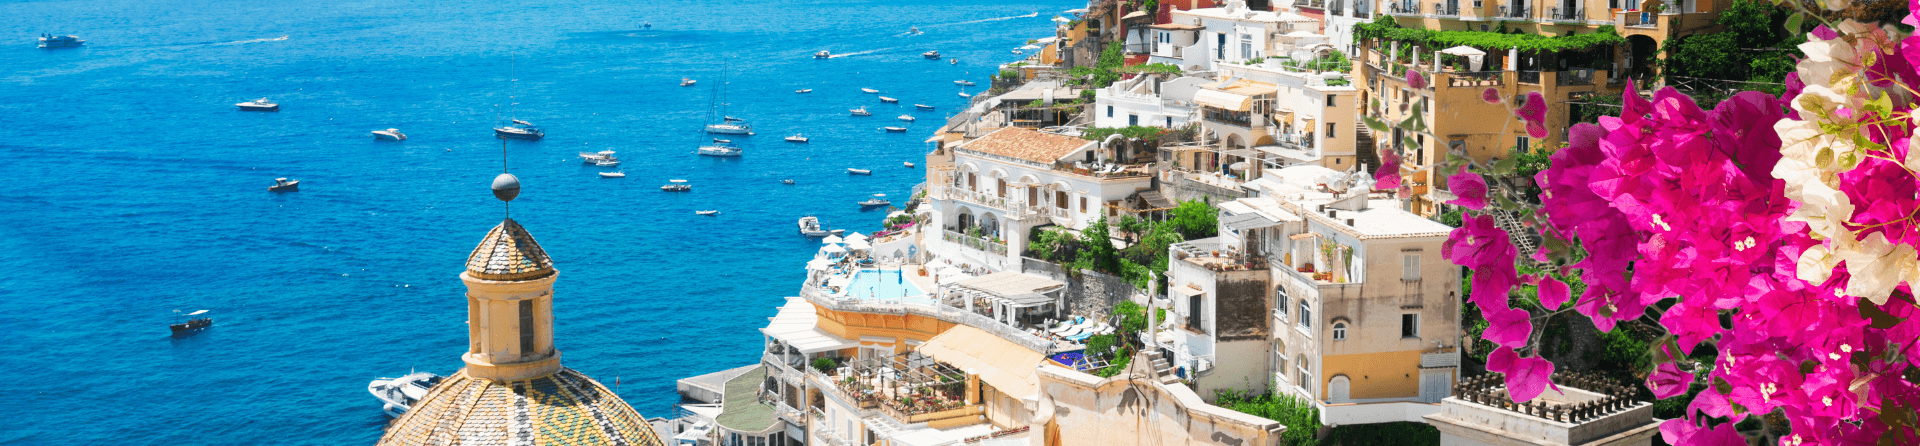 5 things to see and do in Positano